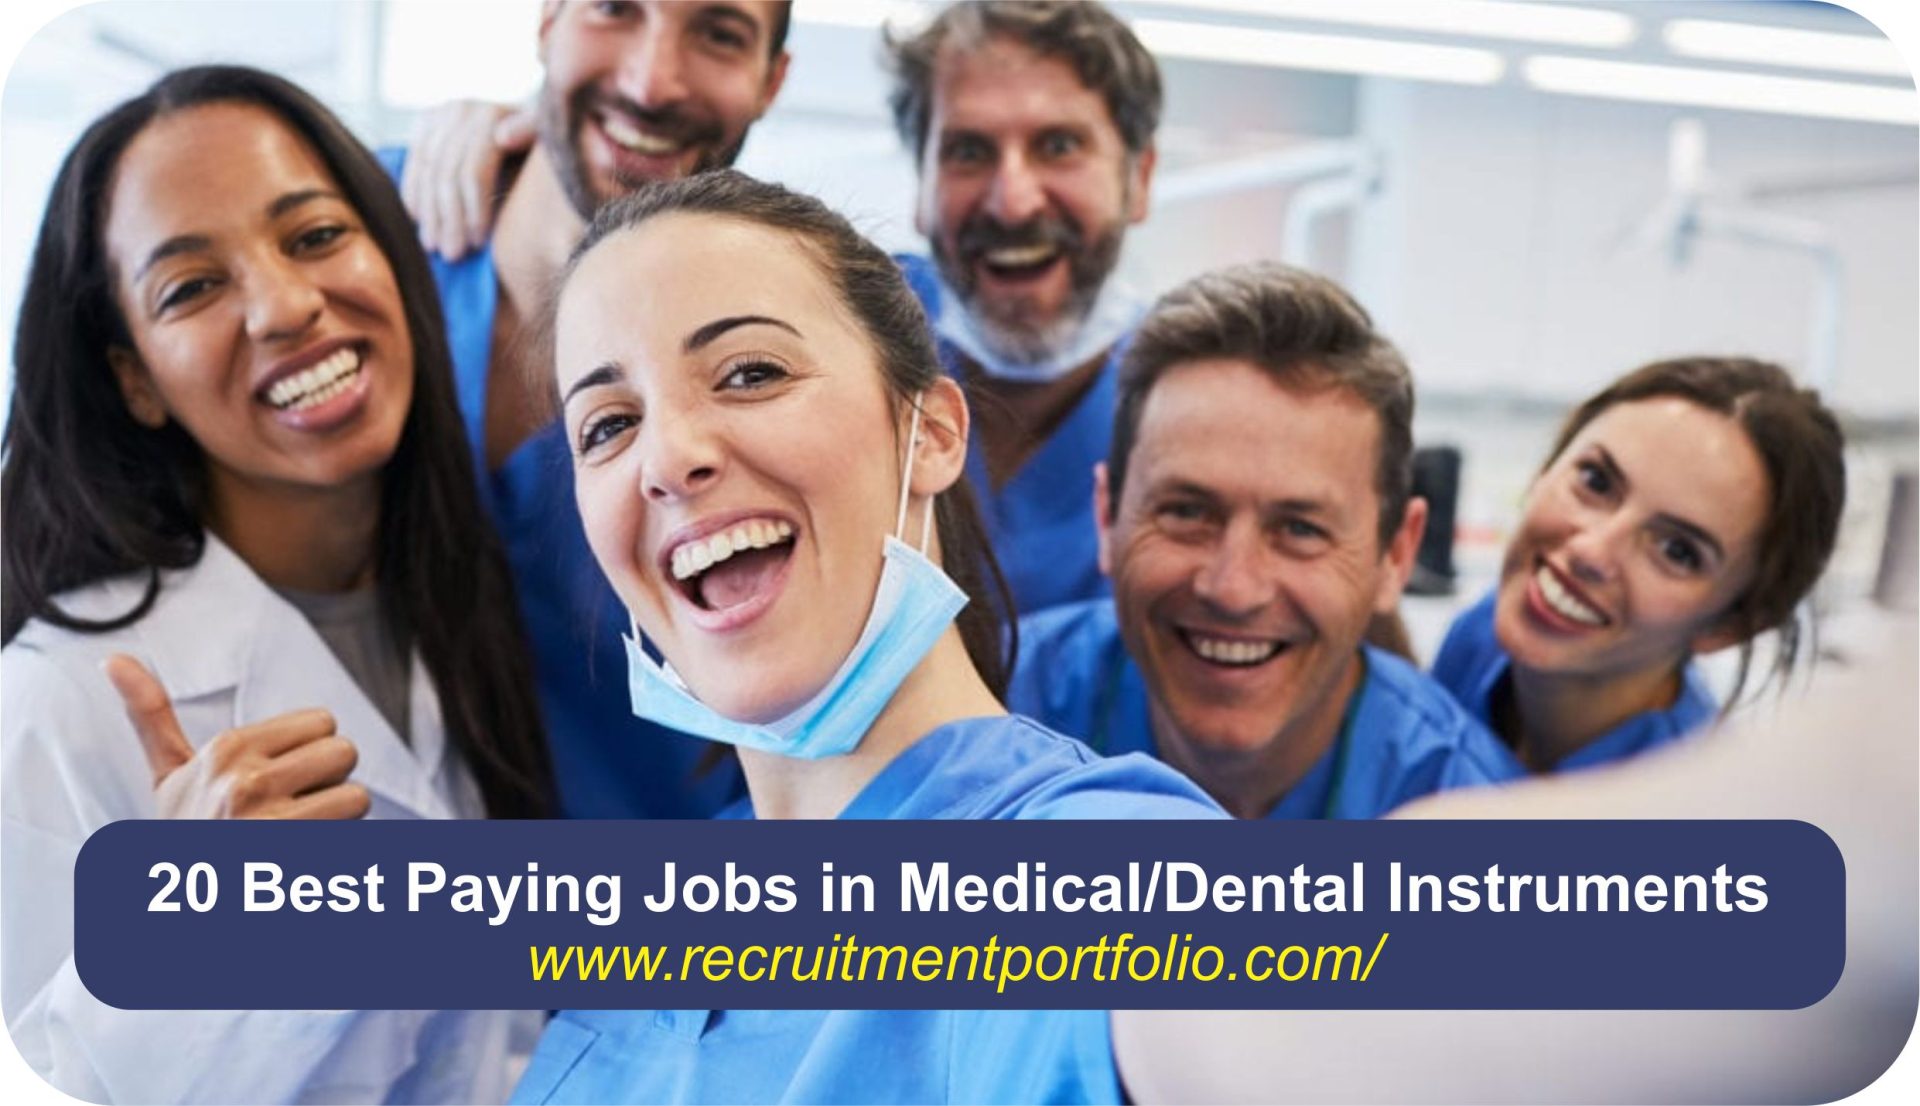 20 Best Paying Jobs in Medical/Dental Instruments | Top 5 Entry-Level Jobs Included